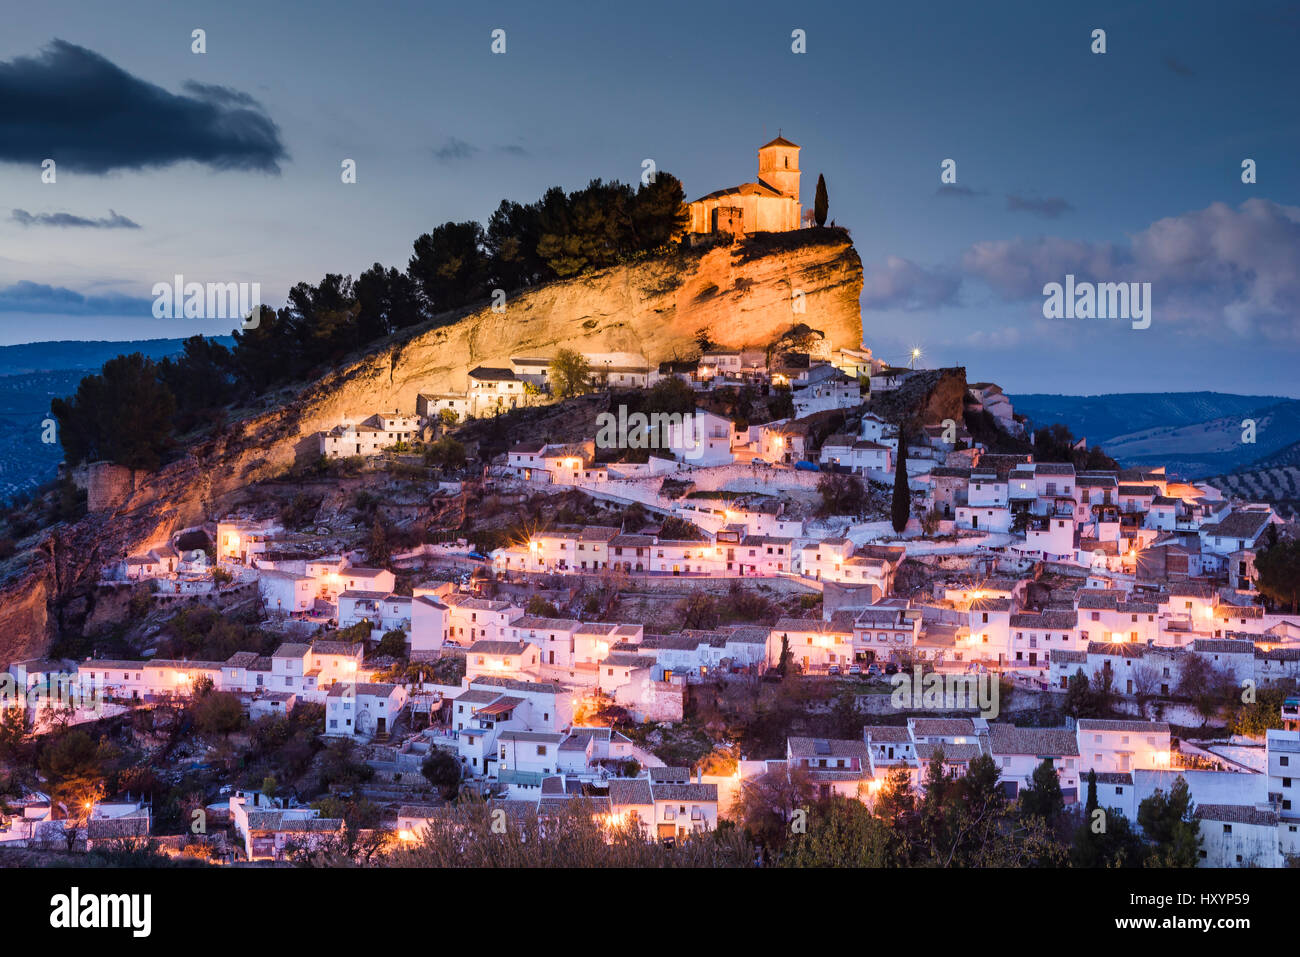 Cityscape with castle on hill in Montefrio at sunset. Montefrío, Granada, Andalusia, Spain, Europe Stock Photo